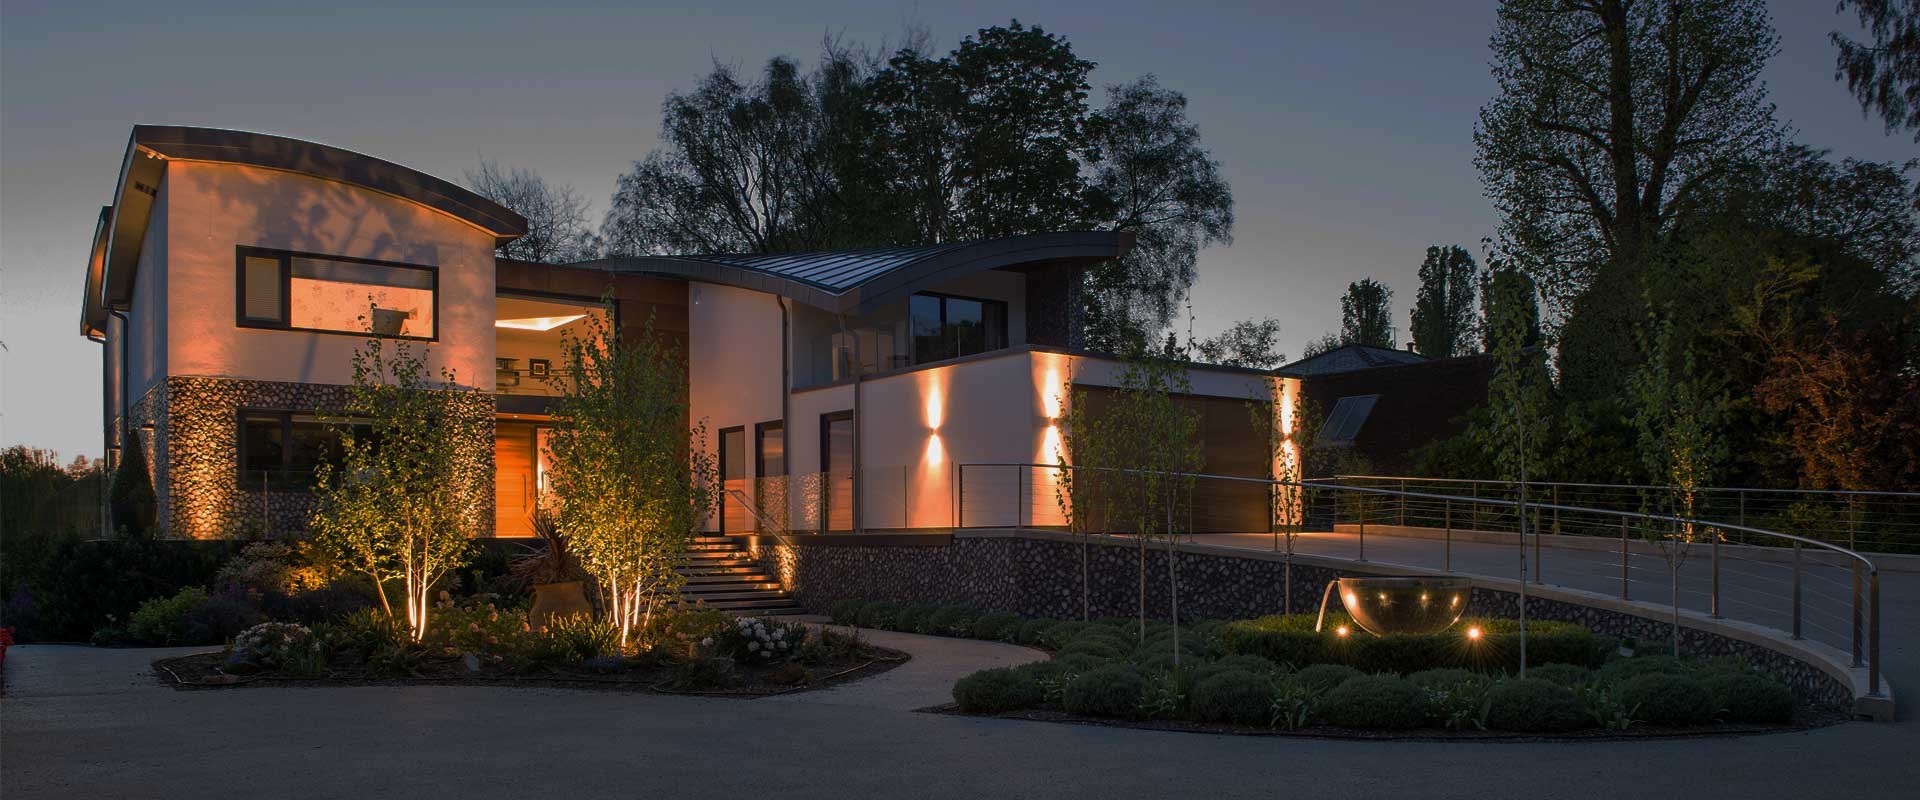 Modern house, garage and front driveway lit up with landscape lighting at dusk